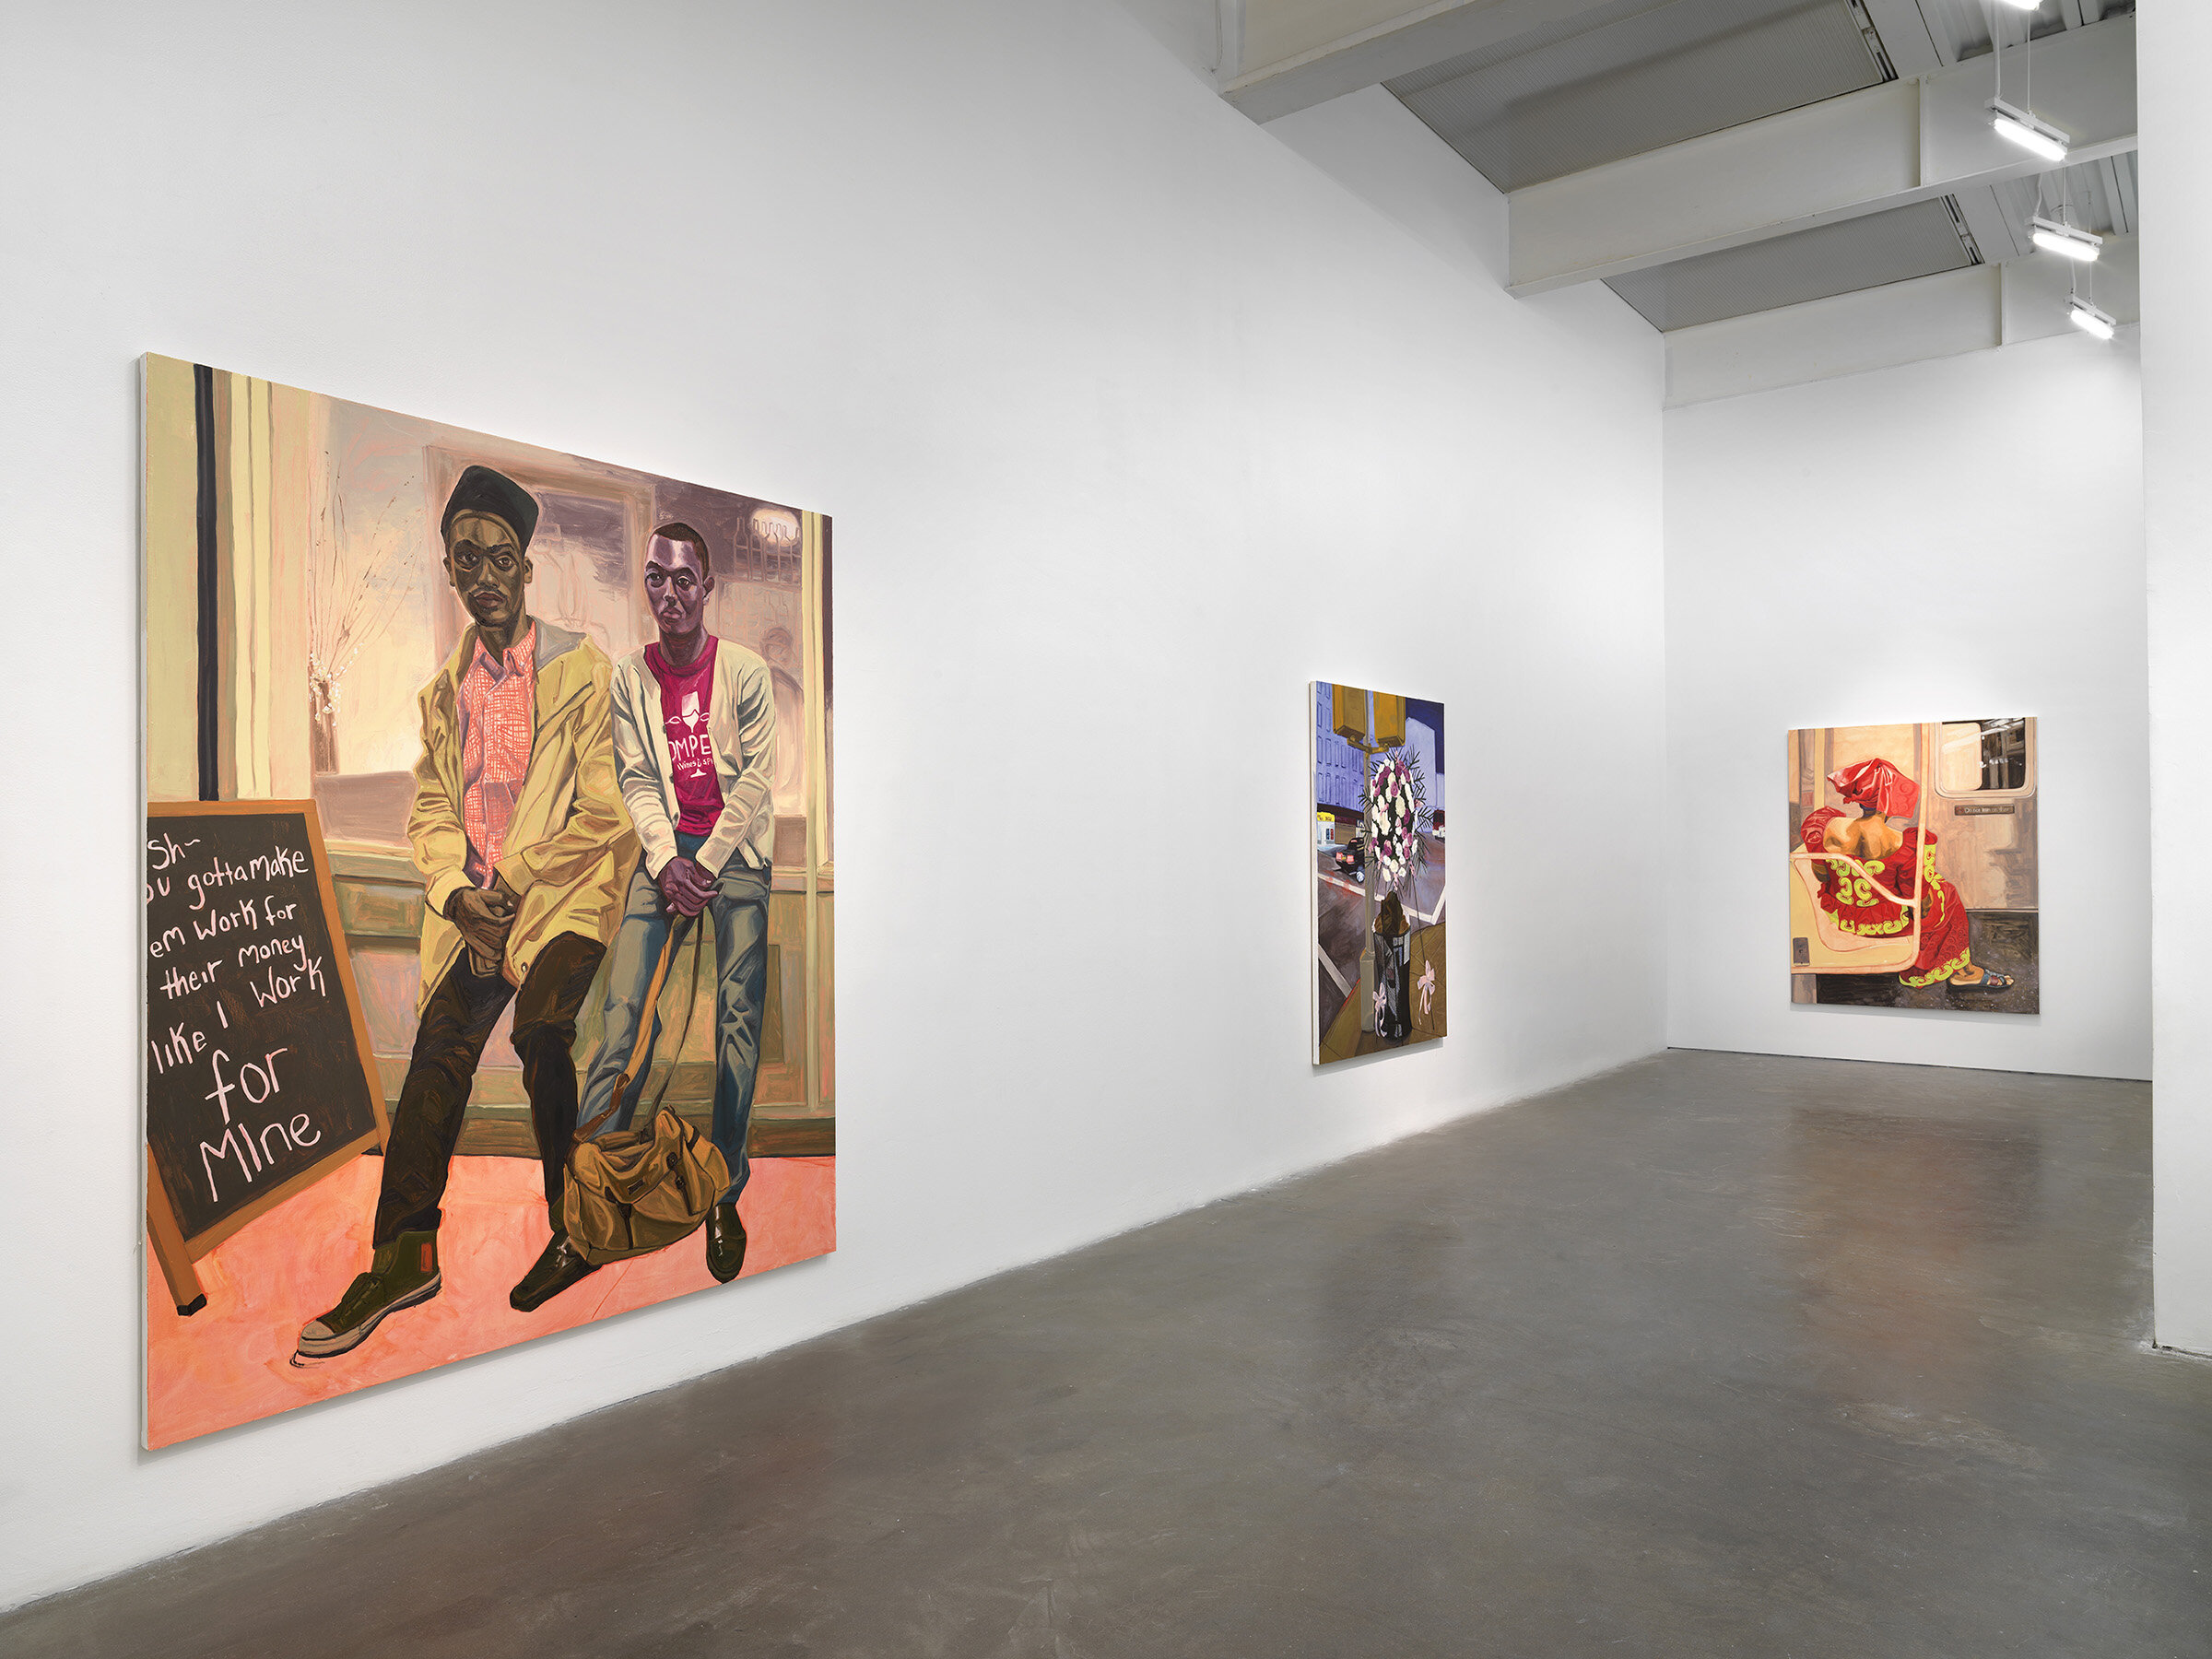  INSTALLATION VIEW: JORDAN CASTEEL, WITHIN REACH, NEW MUSEUM, NEW YORK, FEBRUARY 2 - MAY 24, 2020 